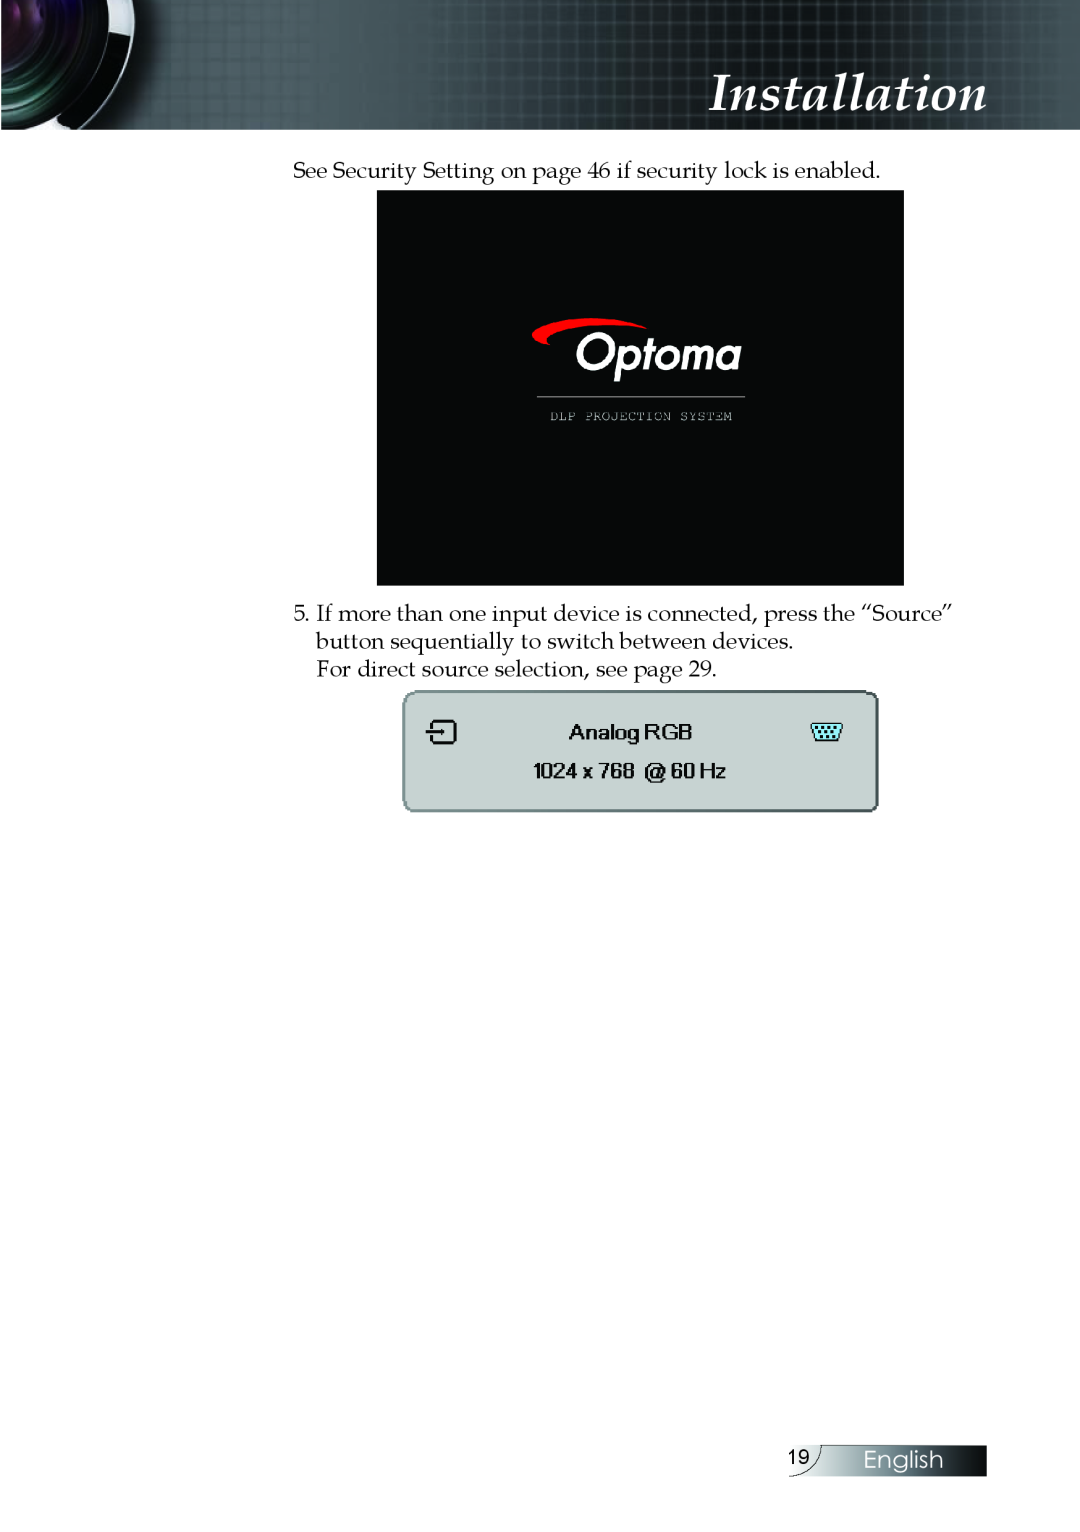 Optoma Technology EH505 manual English, Installation, See Security Setting on page 46 if security lock is enabled 